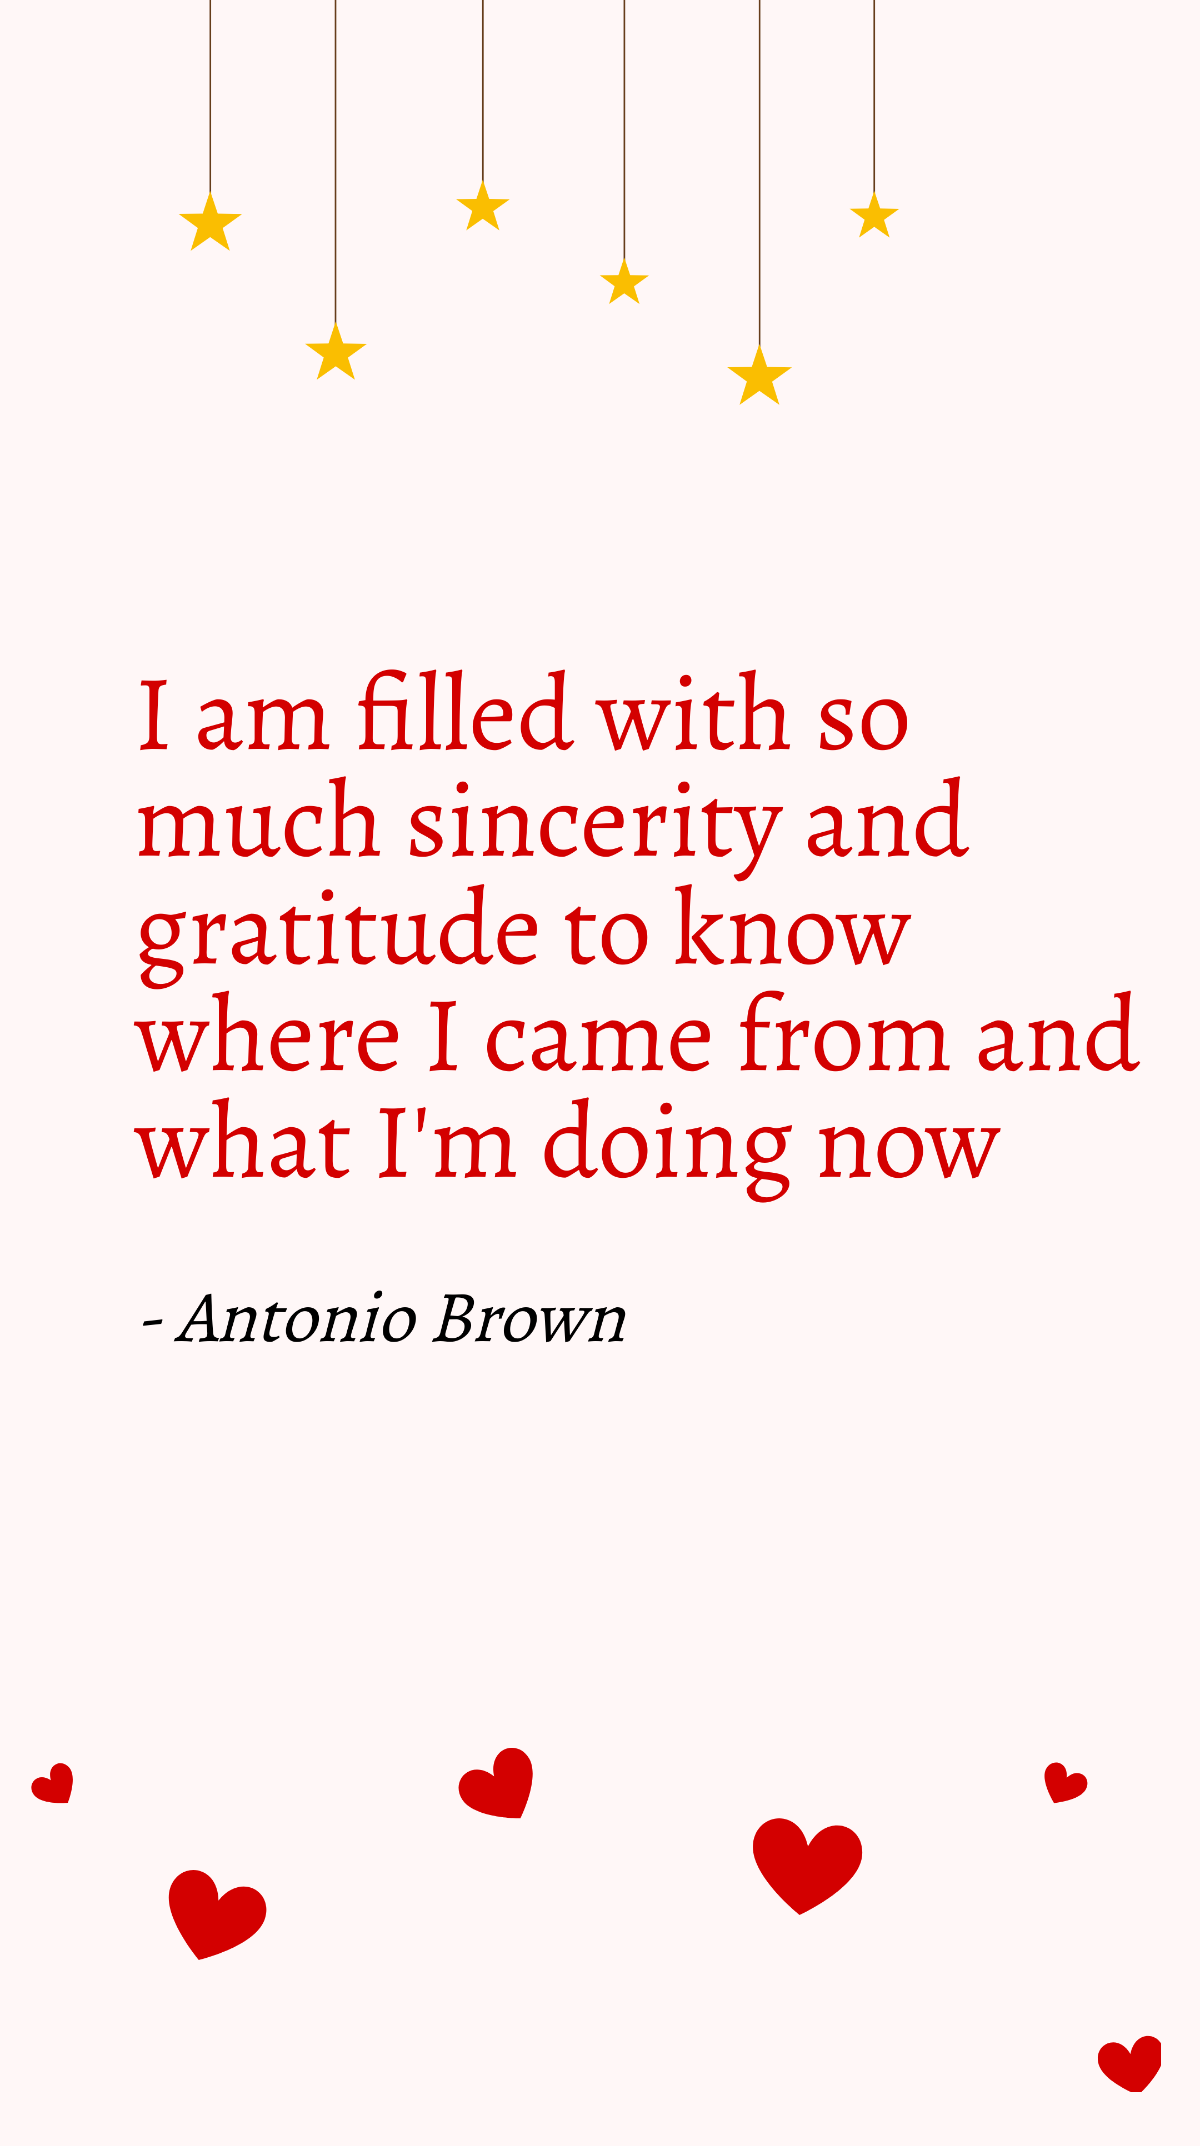 Free Antonio Brown- I am filled with so much sincerity and gratitude to know where I came from and what I'm doing now Template